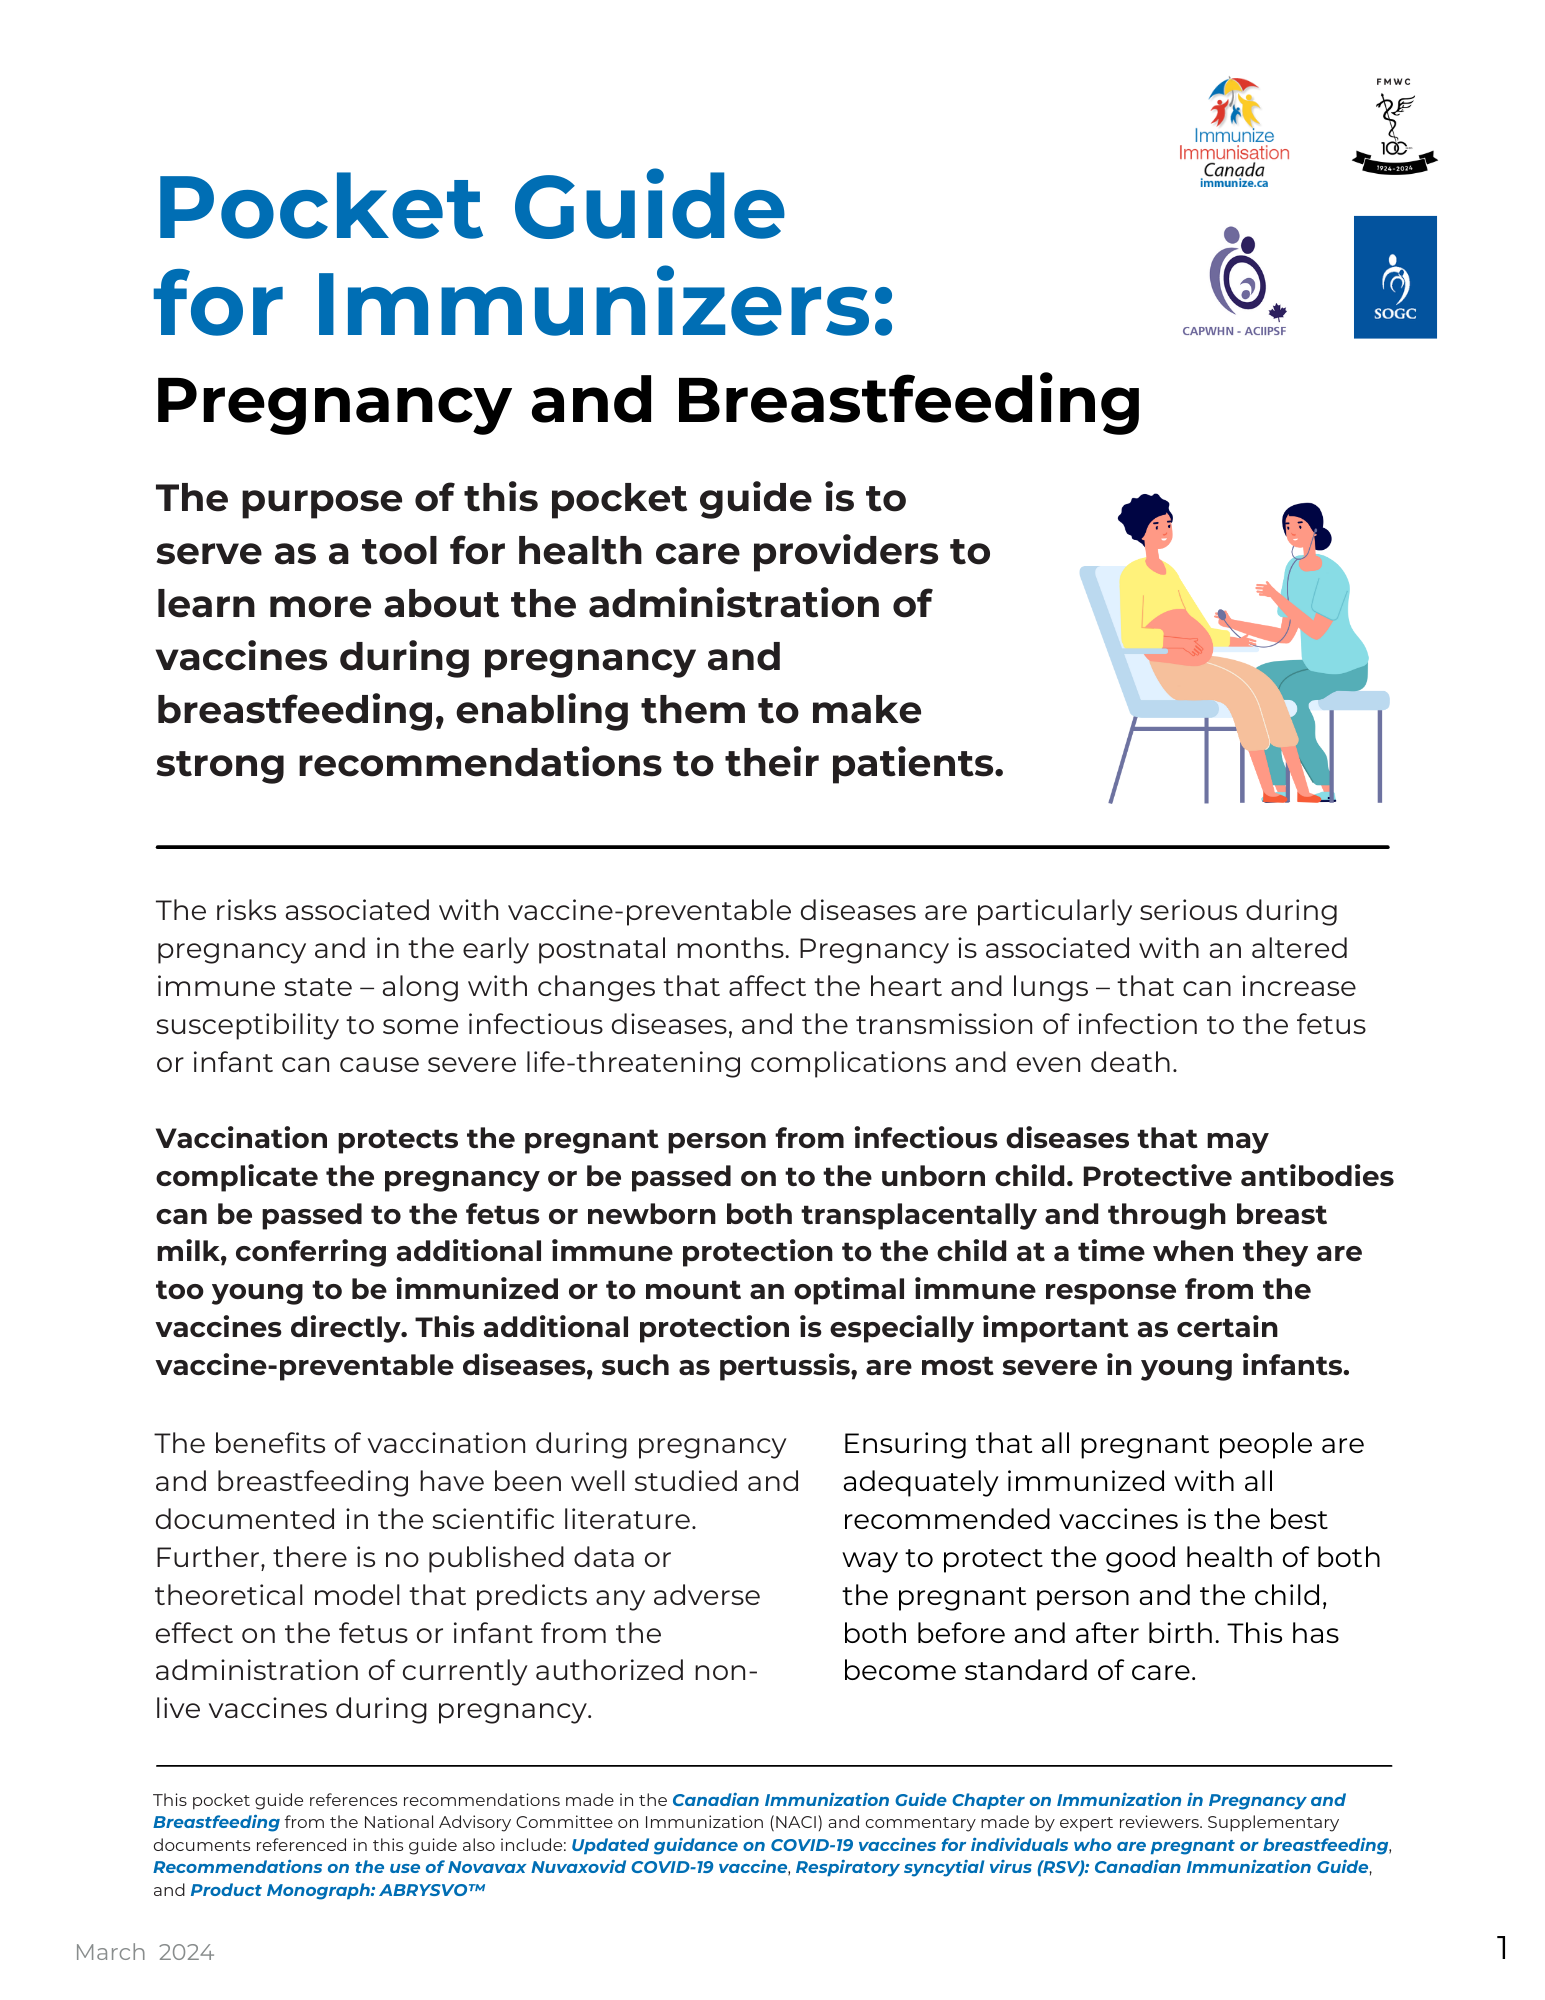 Pocket Guide for Immunizers: Pregnancy and Breastfeeding